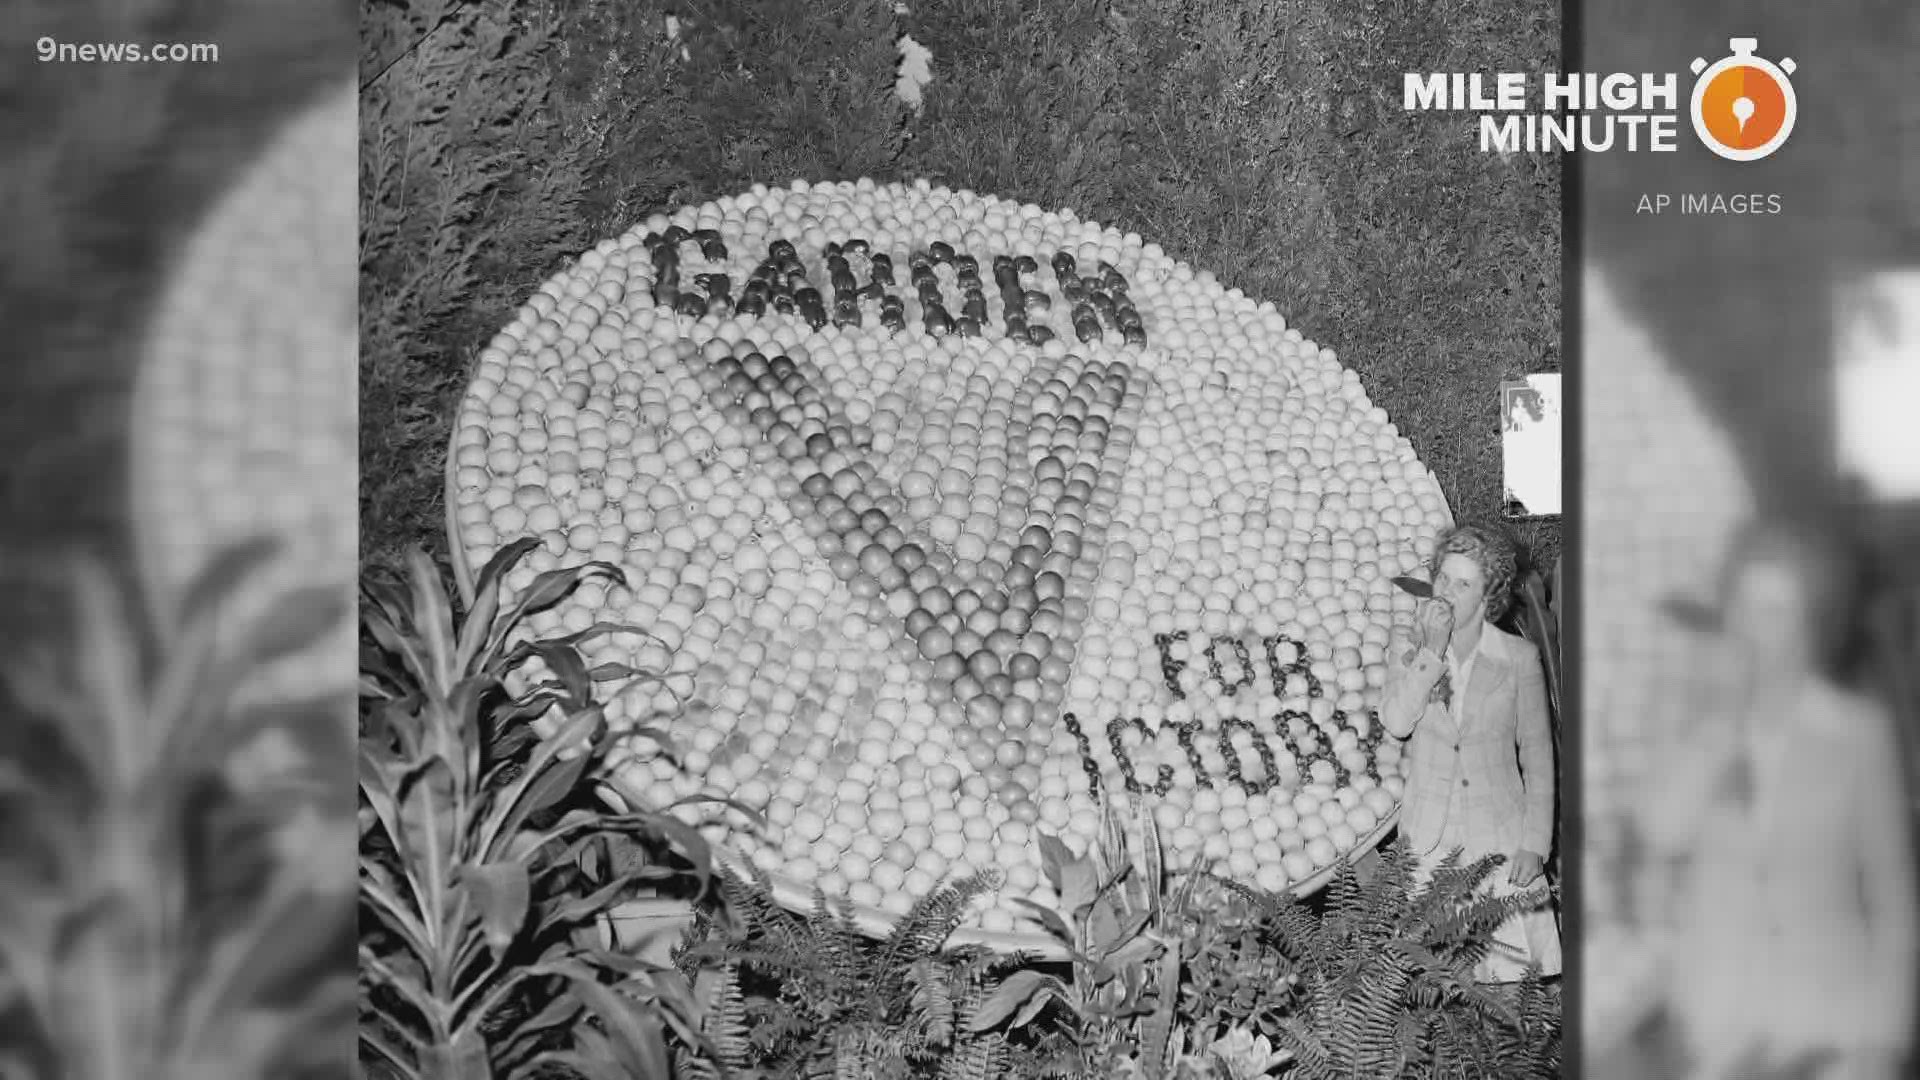 There's a new effort to get more people to grow victory gardens at their homes during the COVID-19 pandemic.